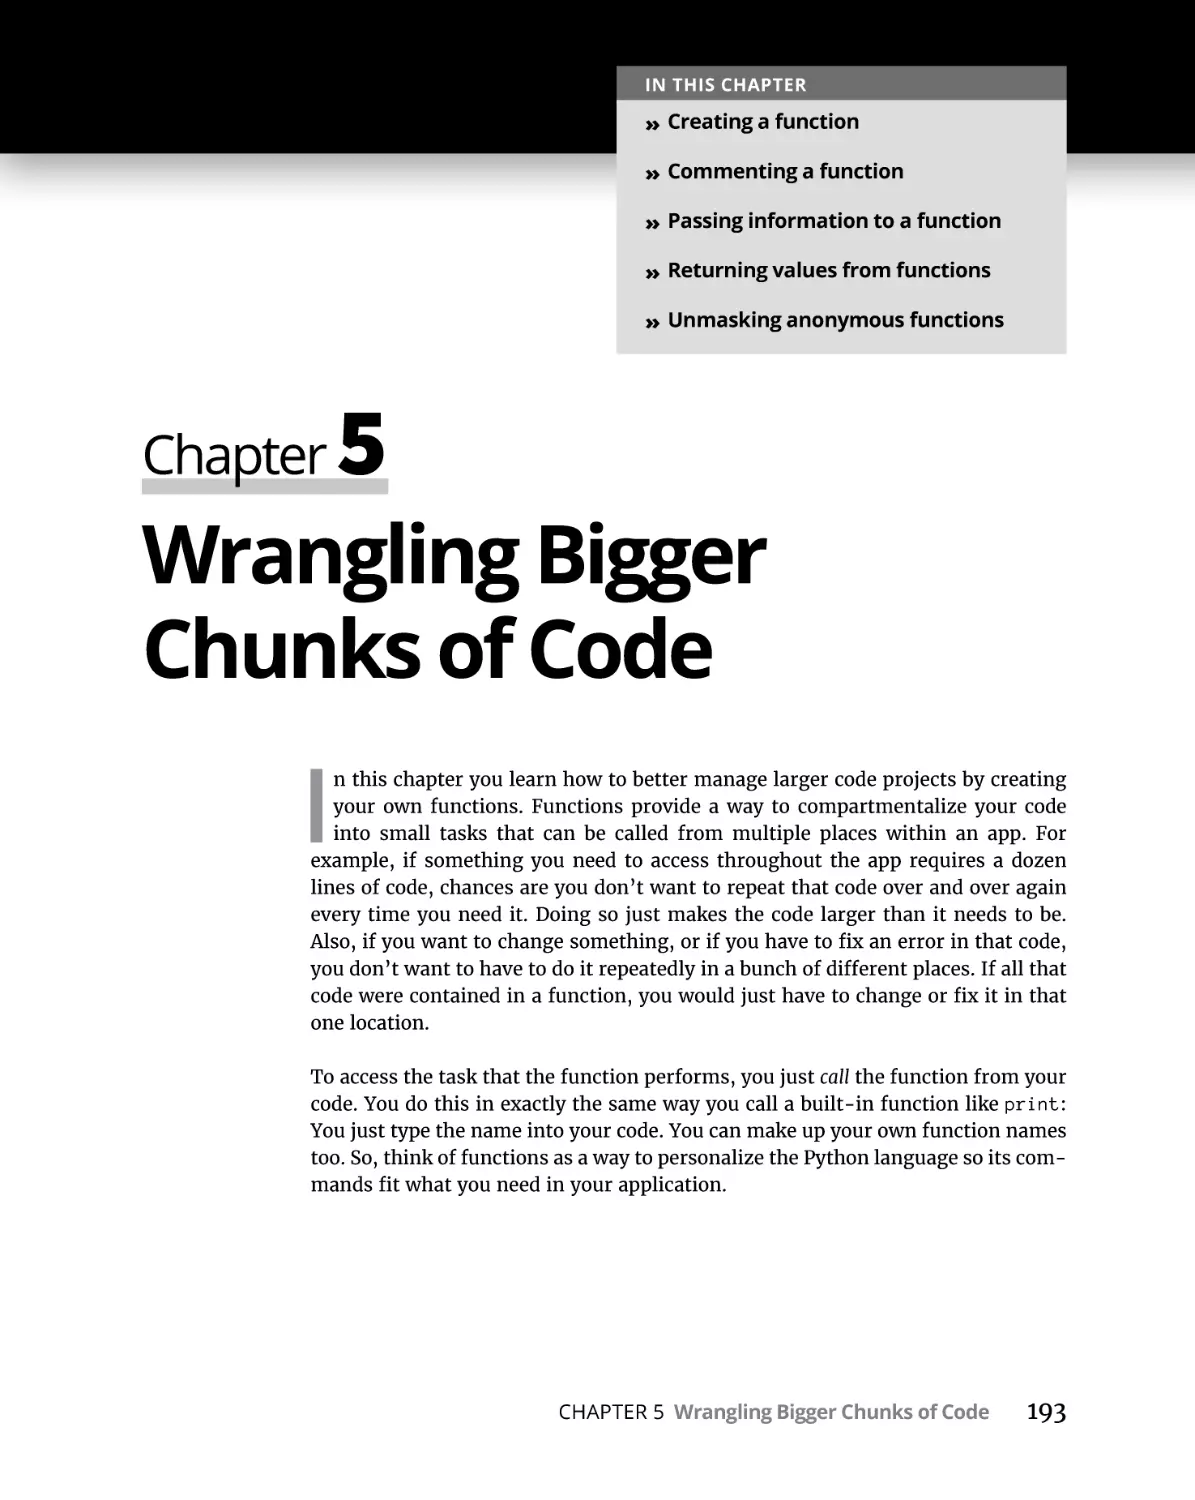 Chapter 5 Wrangling Bigger Chunks of Code